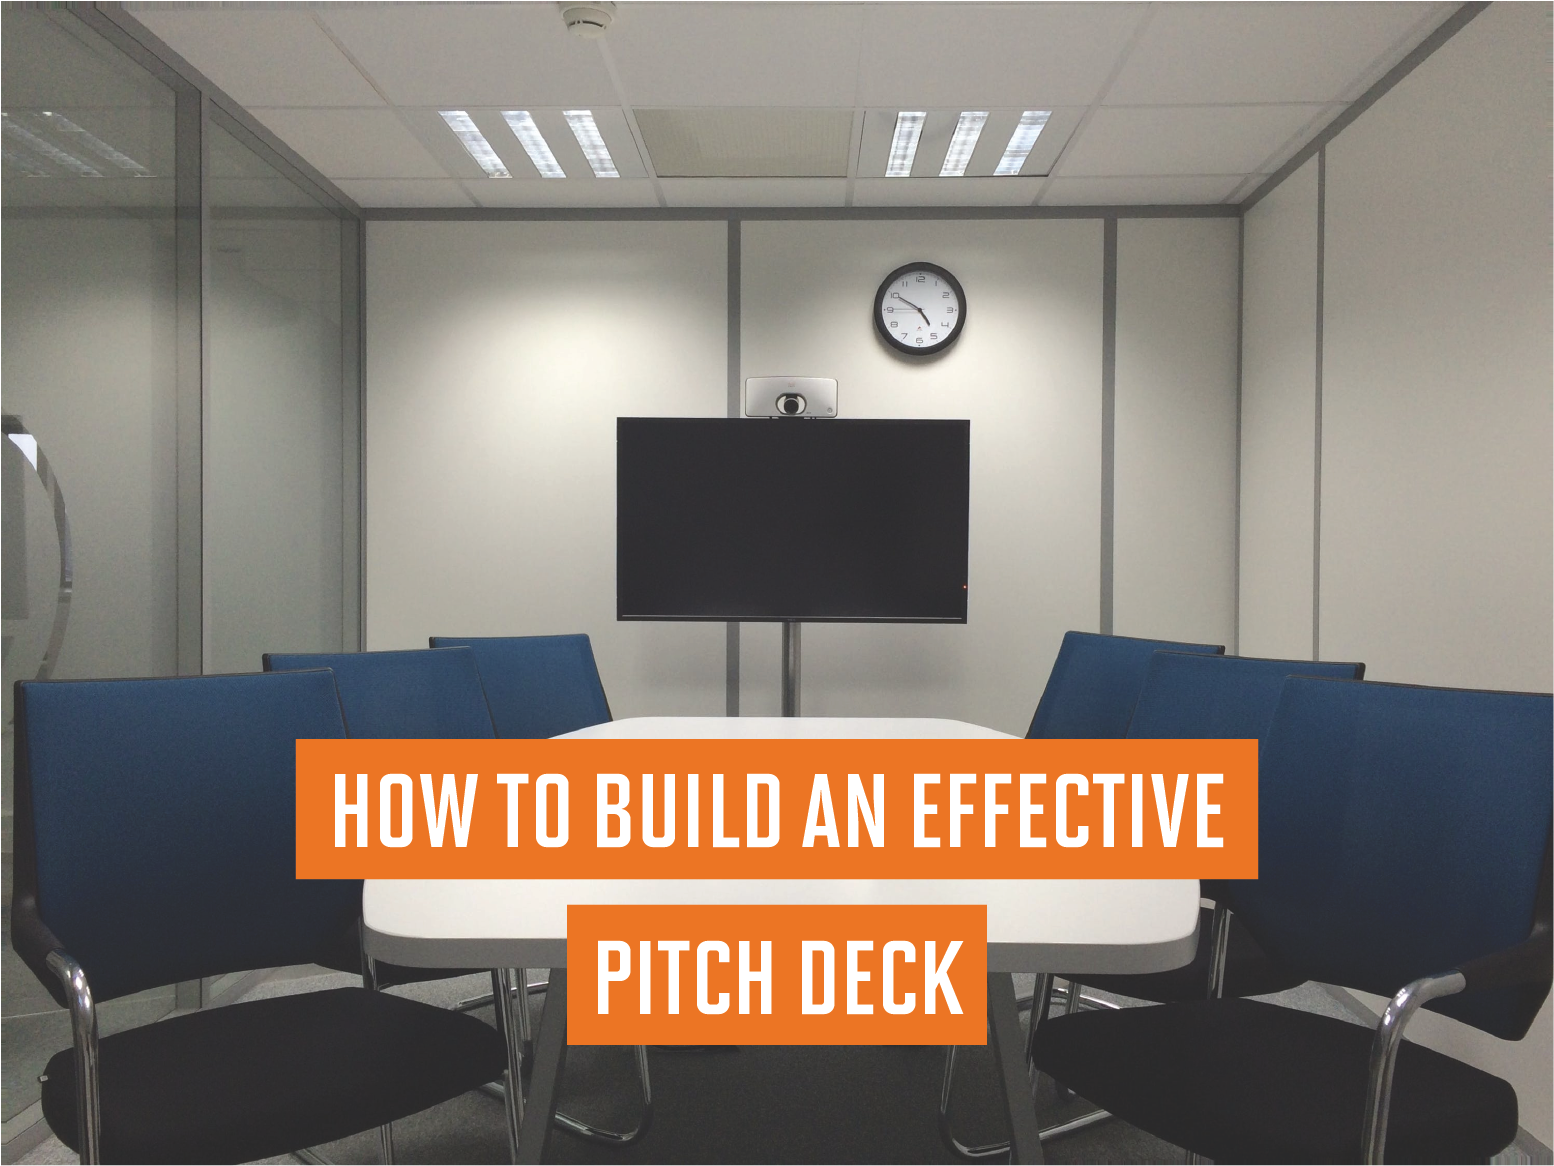 How to Build an Effective Pitch Deck